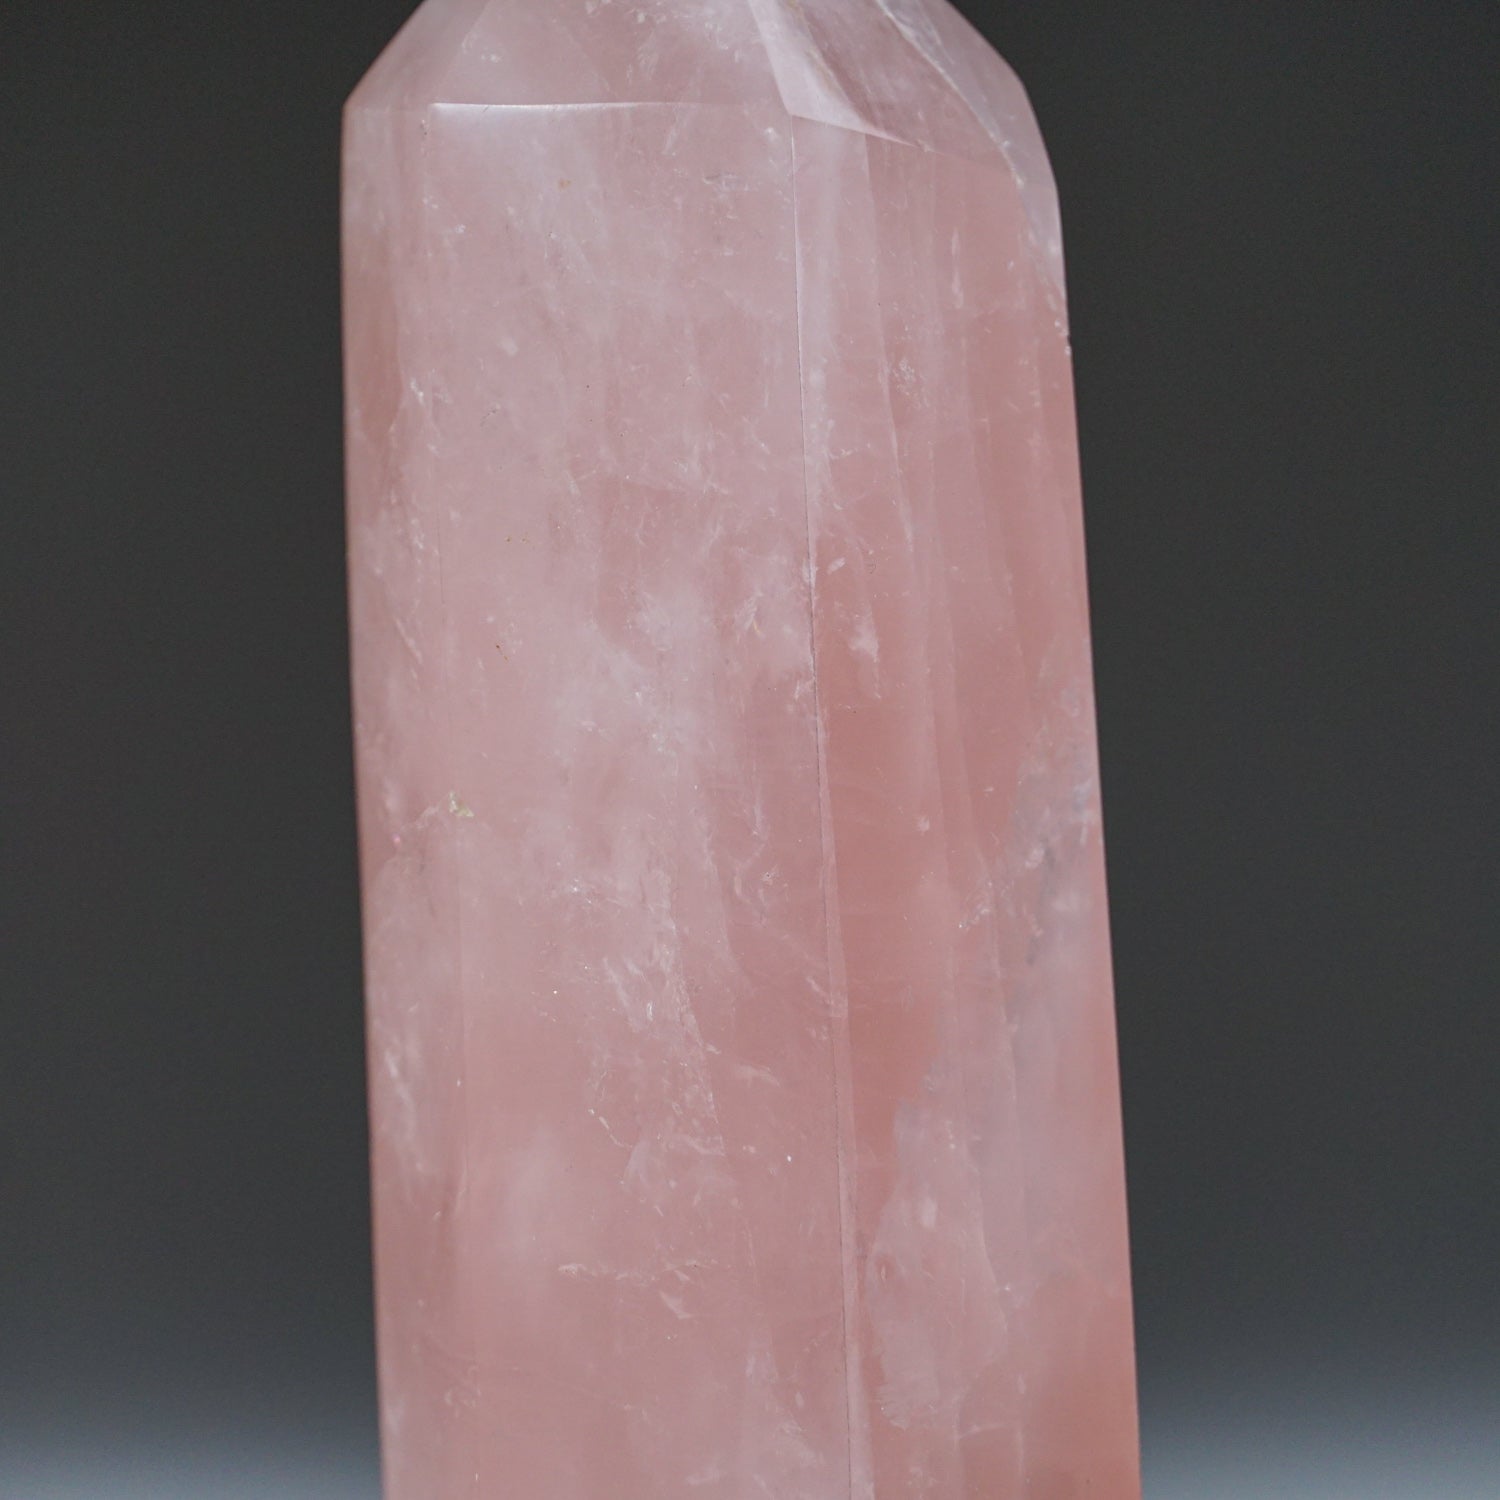 Genuine Rose Quartz Polished Point from Brazil (1.2 lbs)